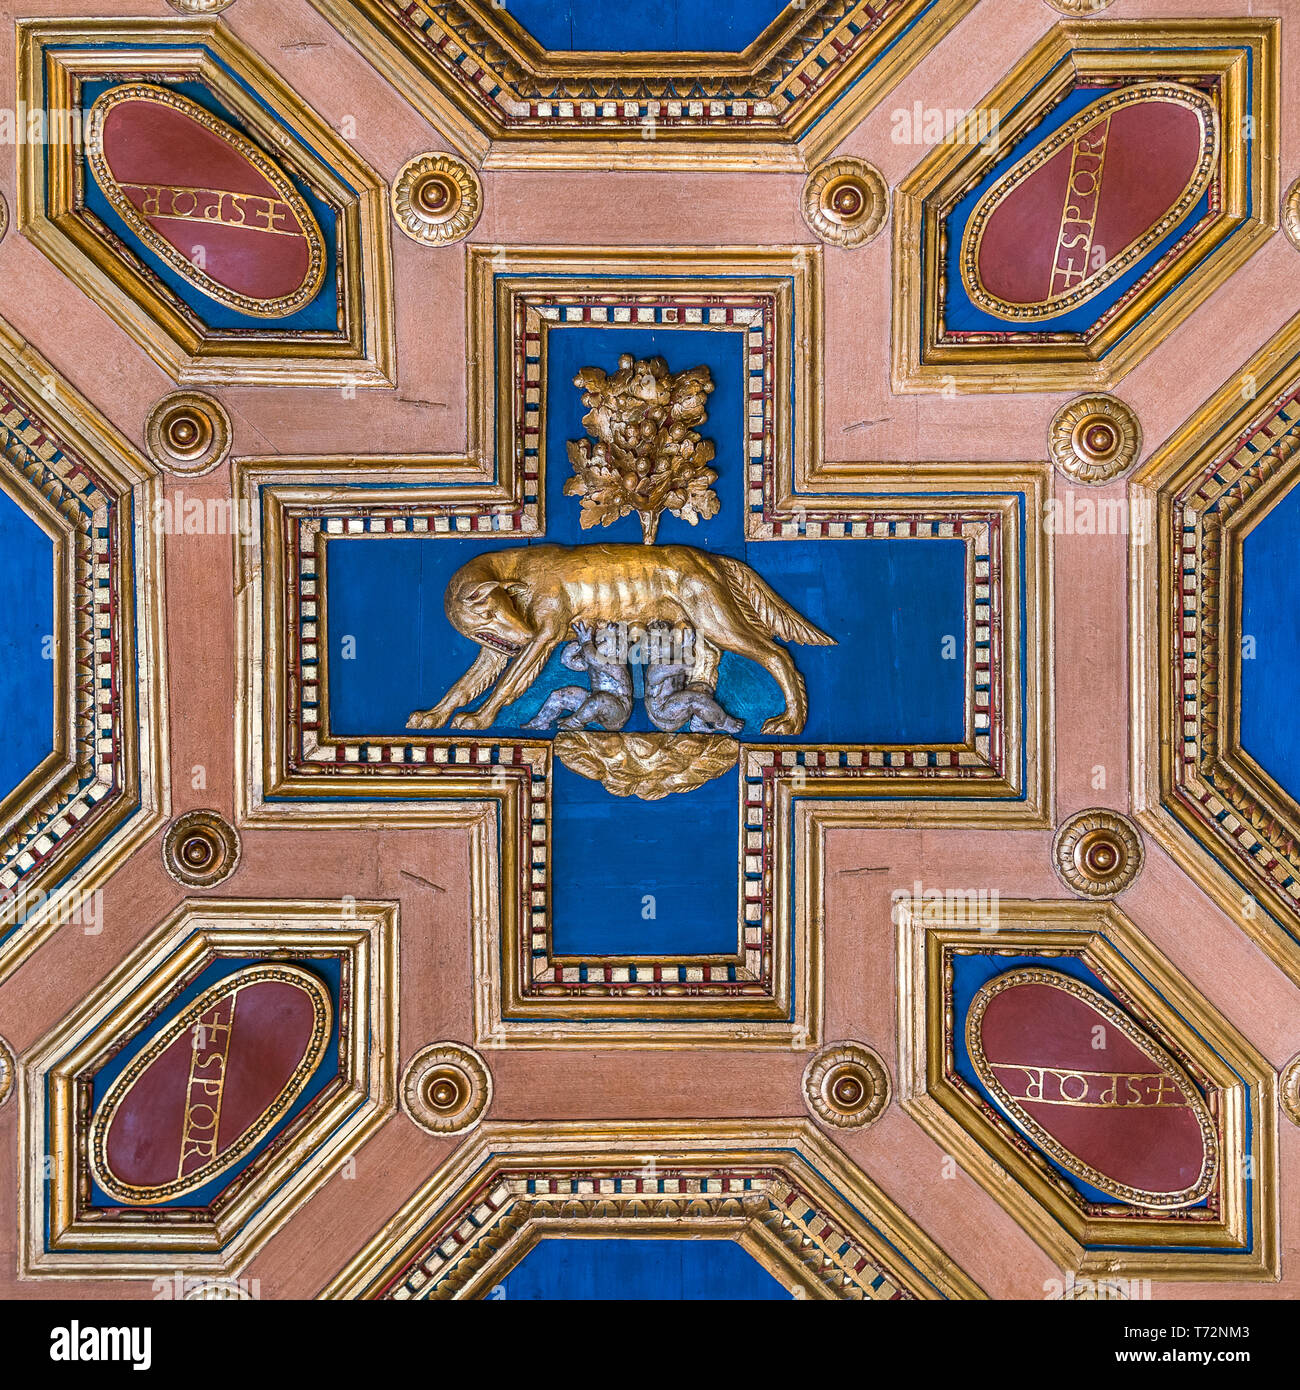 Wooden decoration with the Wolf in the ceiling of the Capitoline Museums, in Rome, Italy. Stock Photo